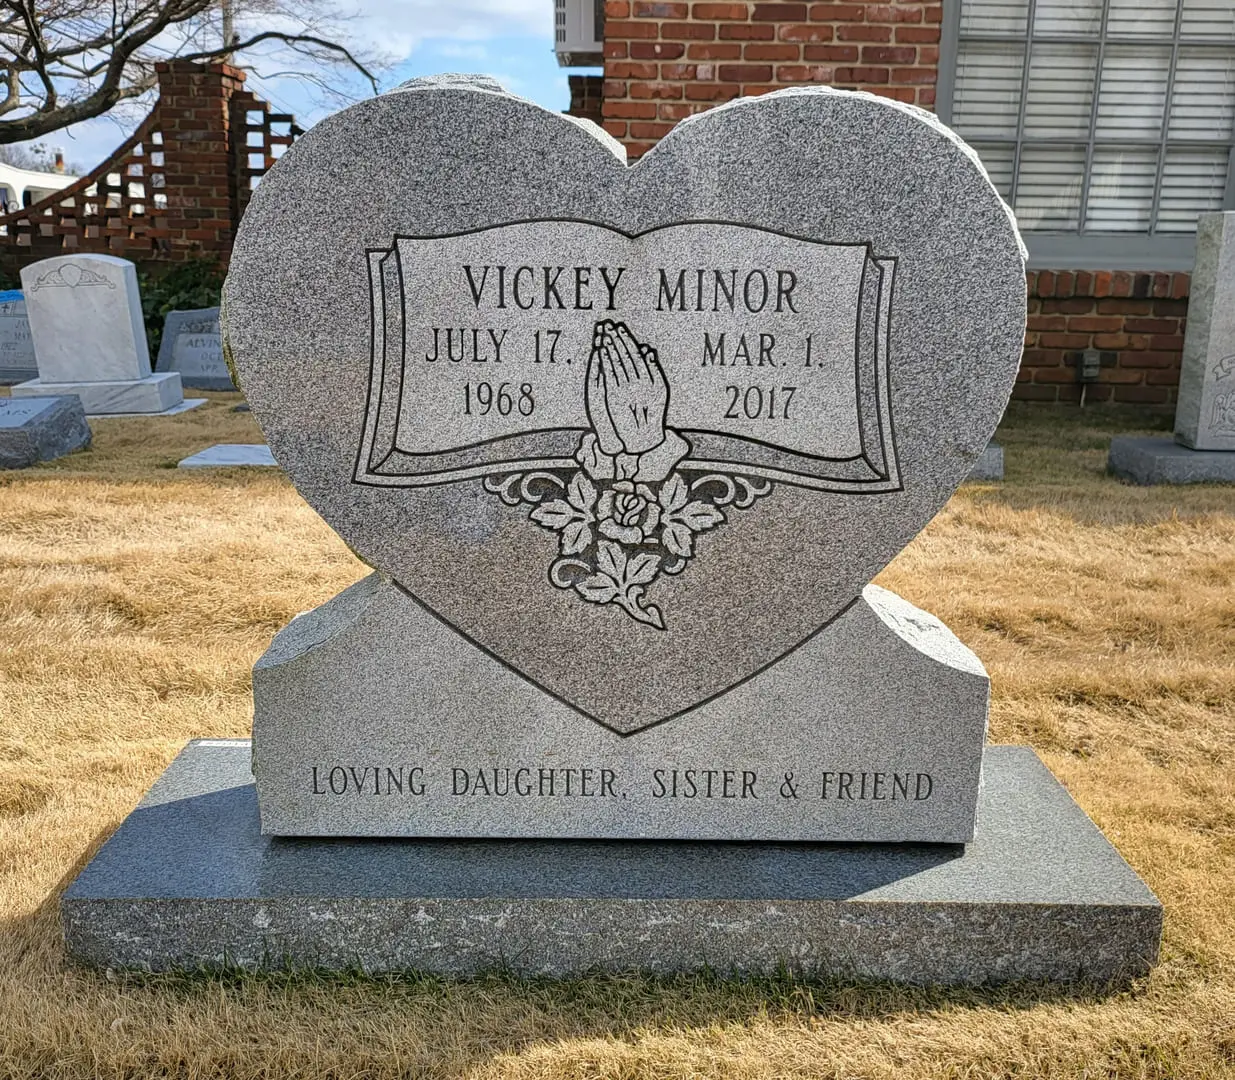 A memorial slab for Vickey Minor with rose illustration